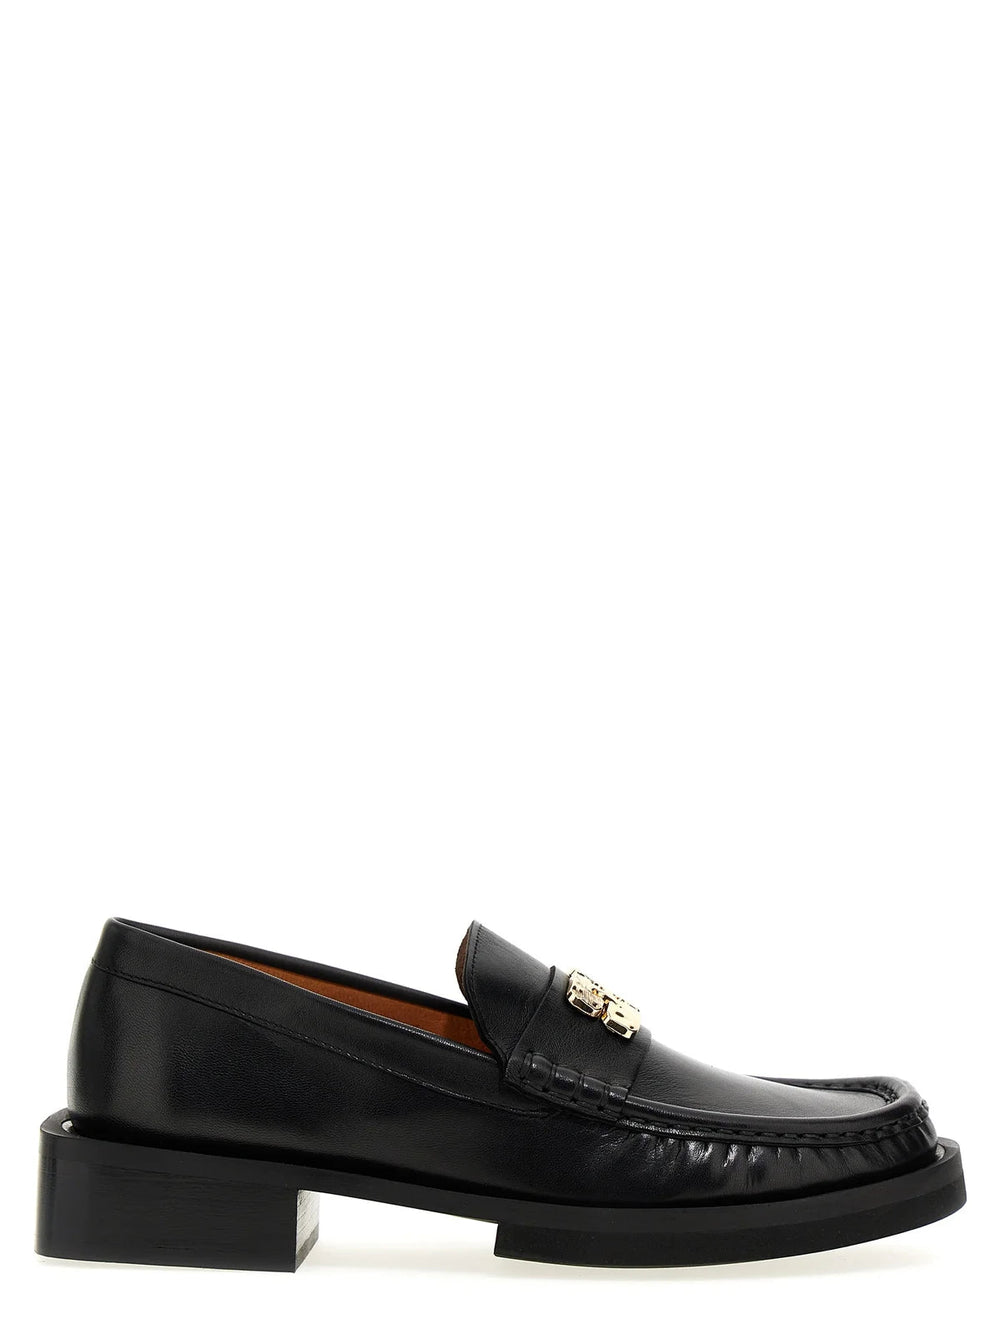 BUTTERFLY LOGO LOAFERS IN BLACK SHOES GANNI 